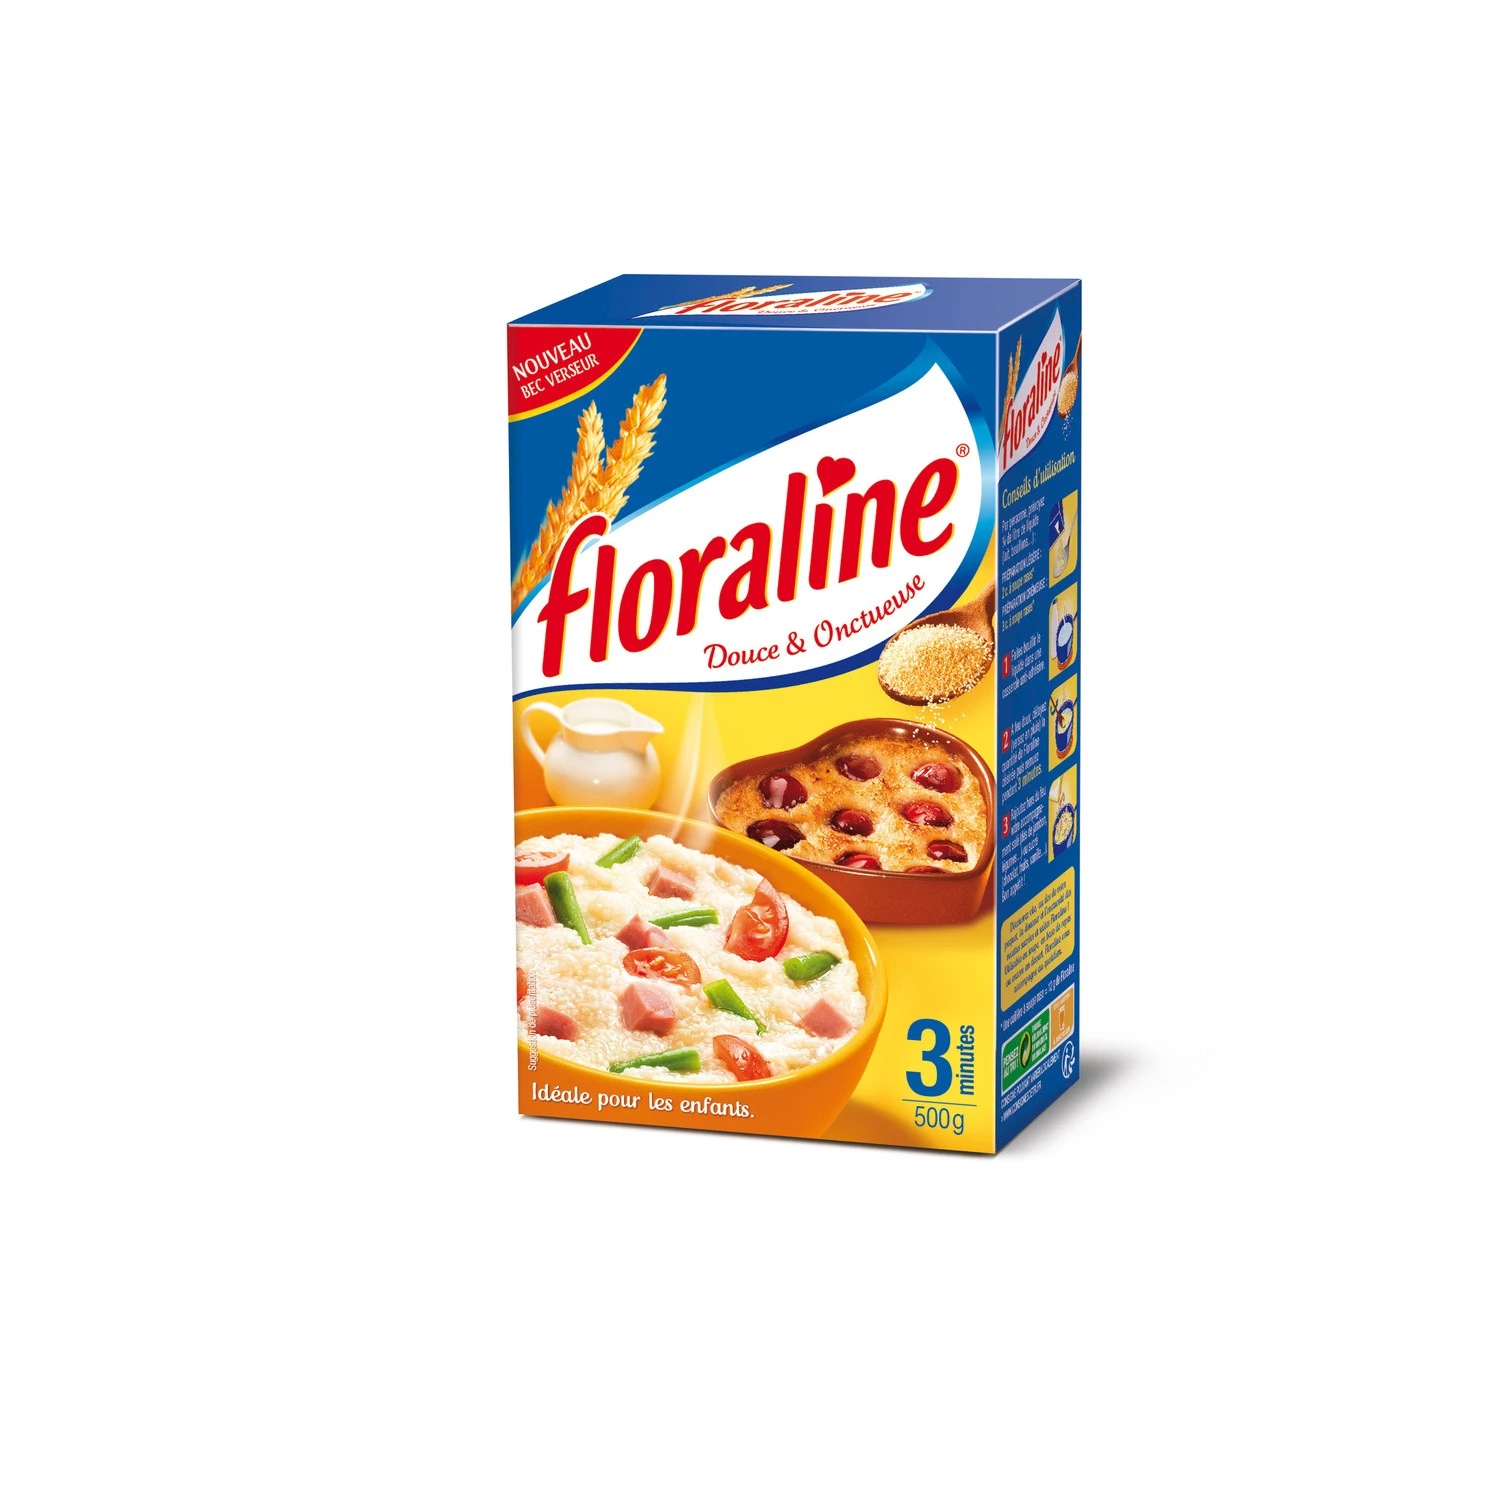 Specialty Cereal to Cook 500g - FLORALINE